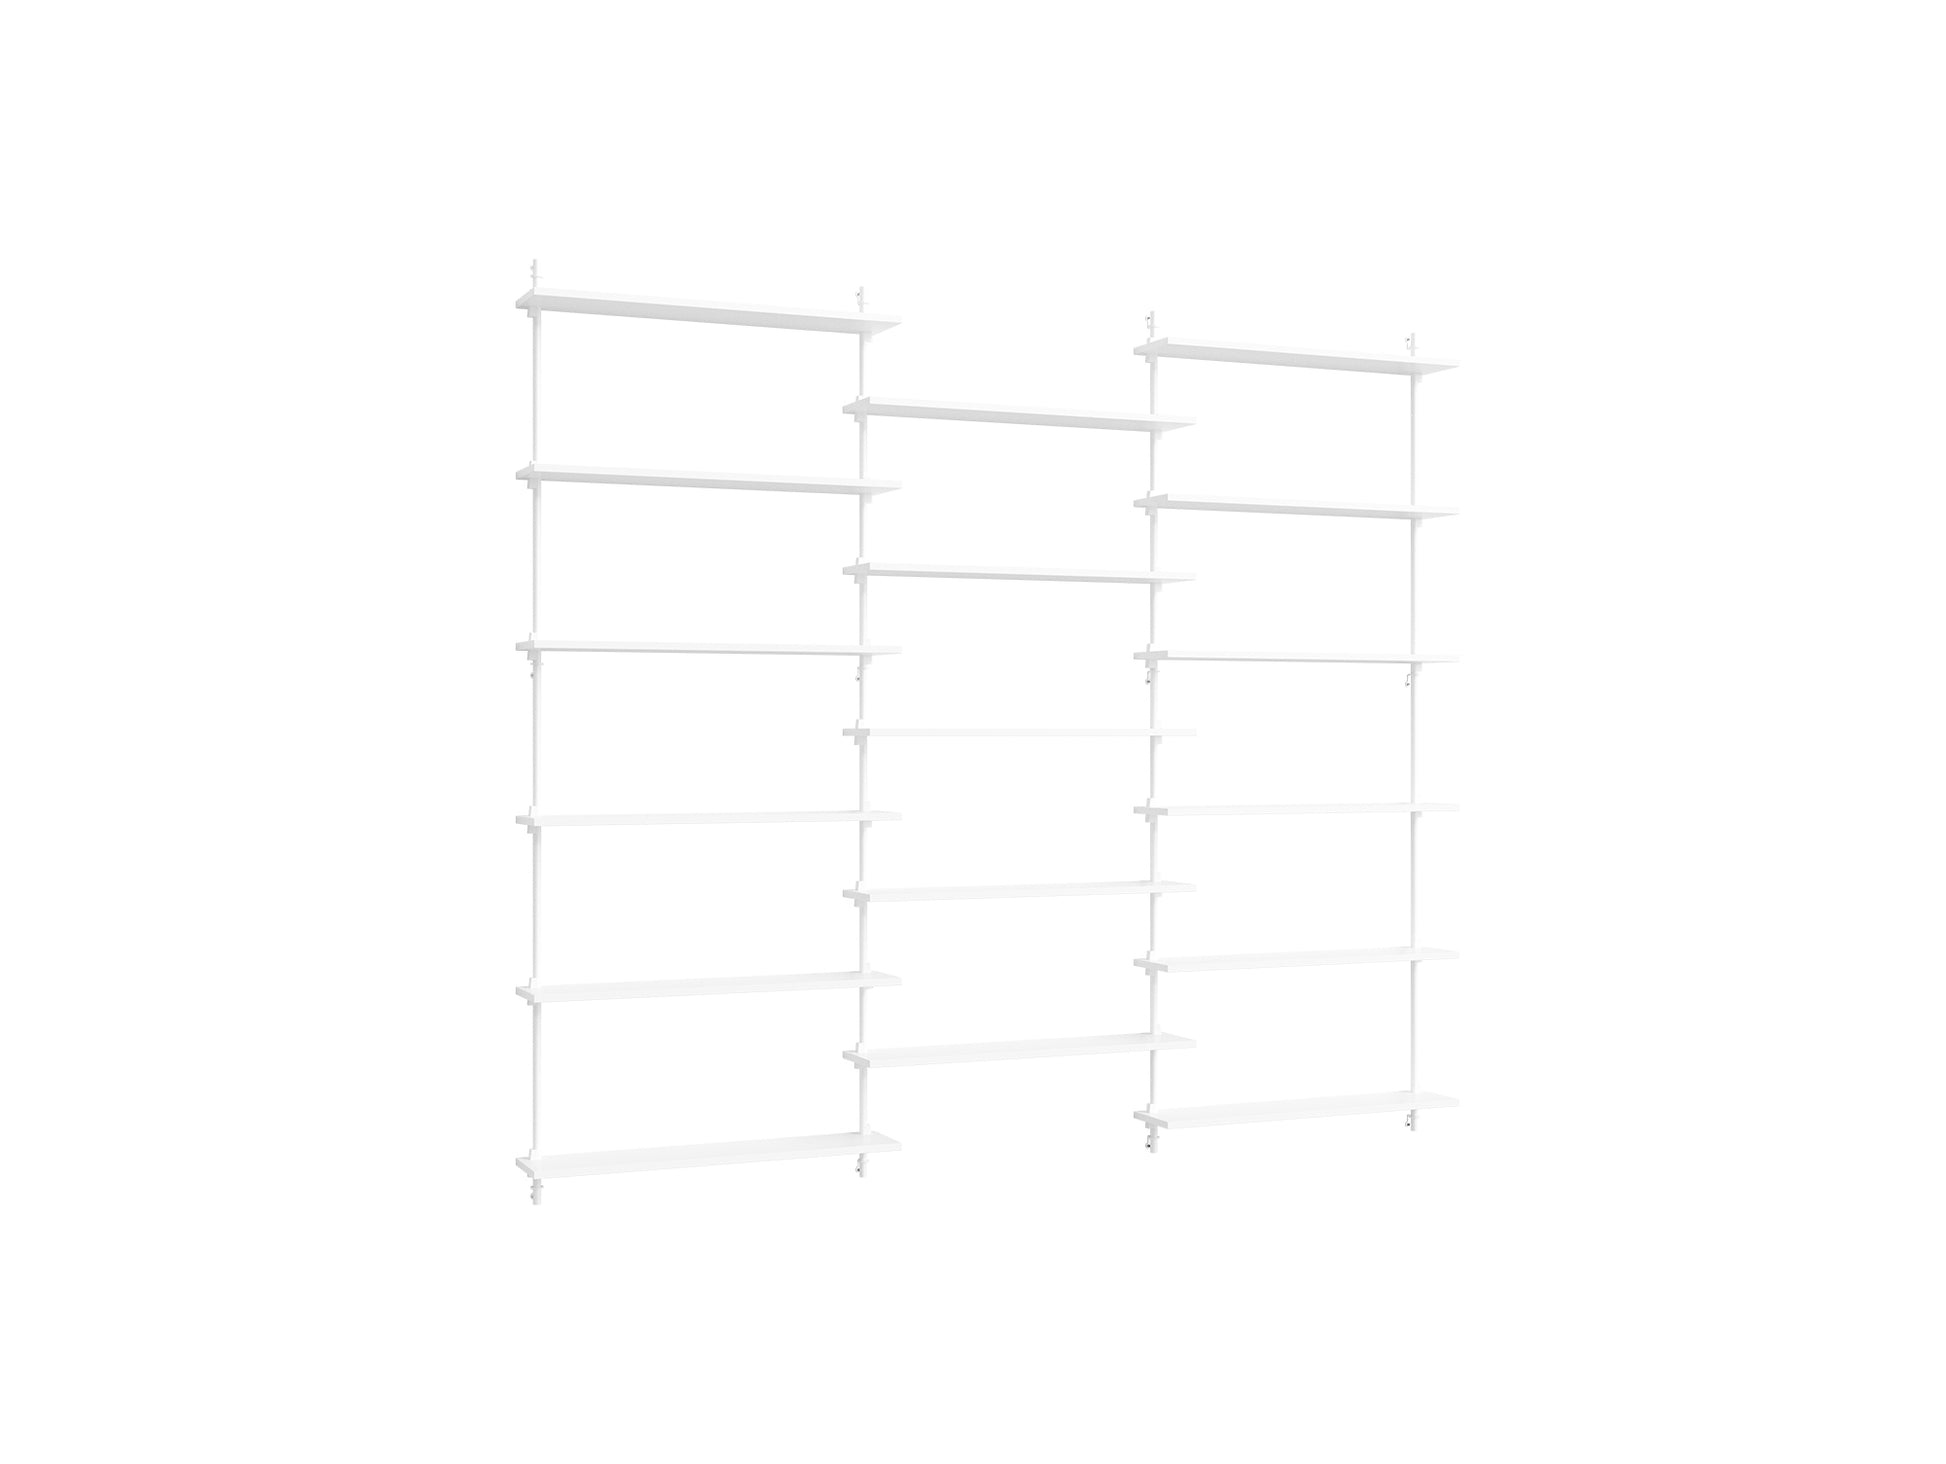 Wall Shelving System Sets (200 cm) by Moebe - WS.200.3 / White Uprights / White Painted Oak